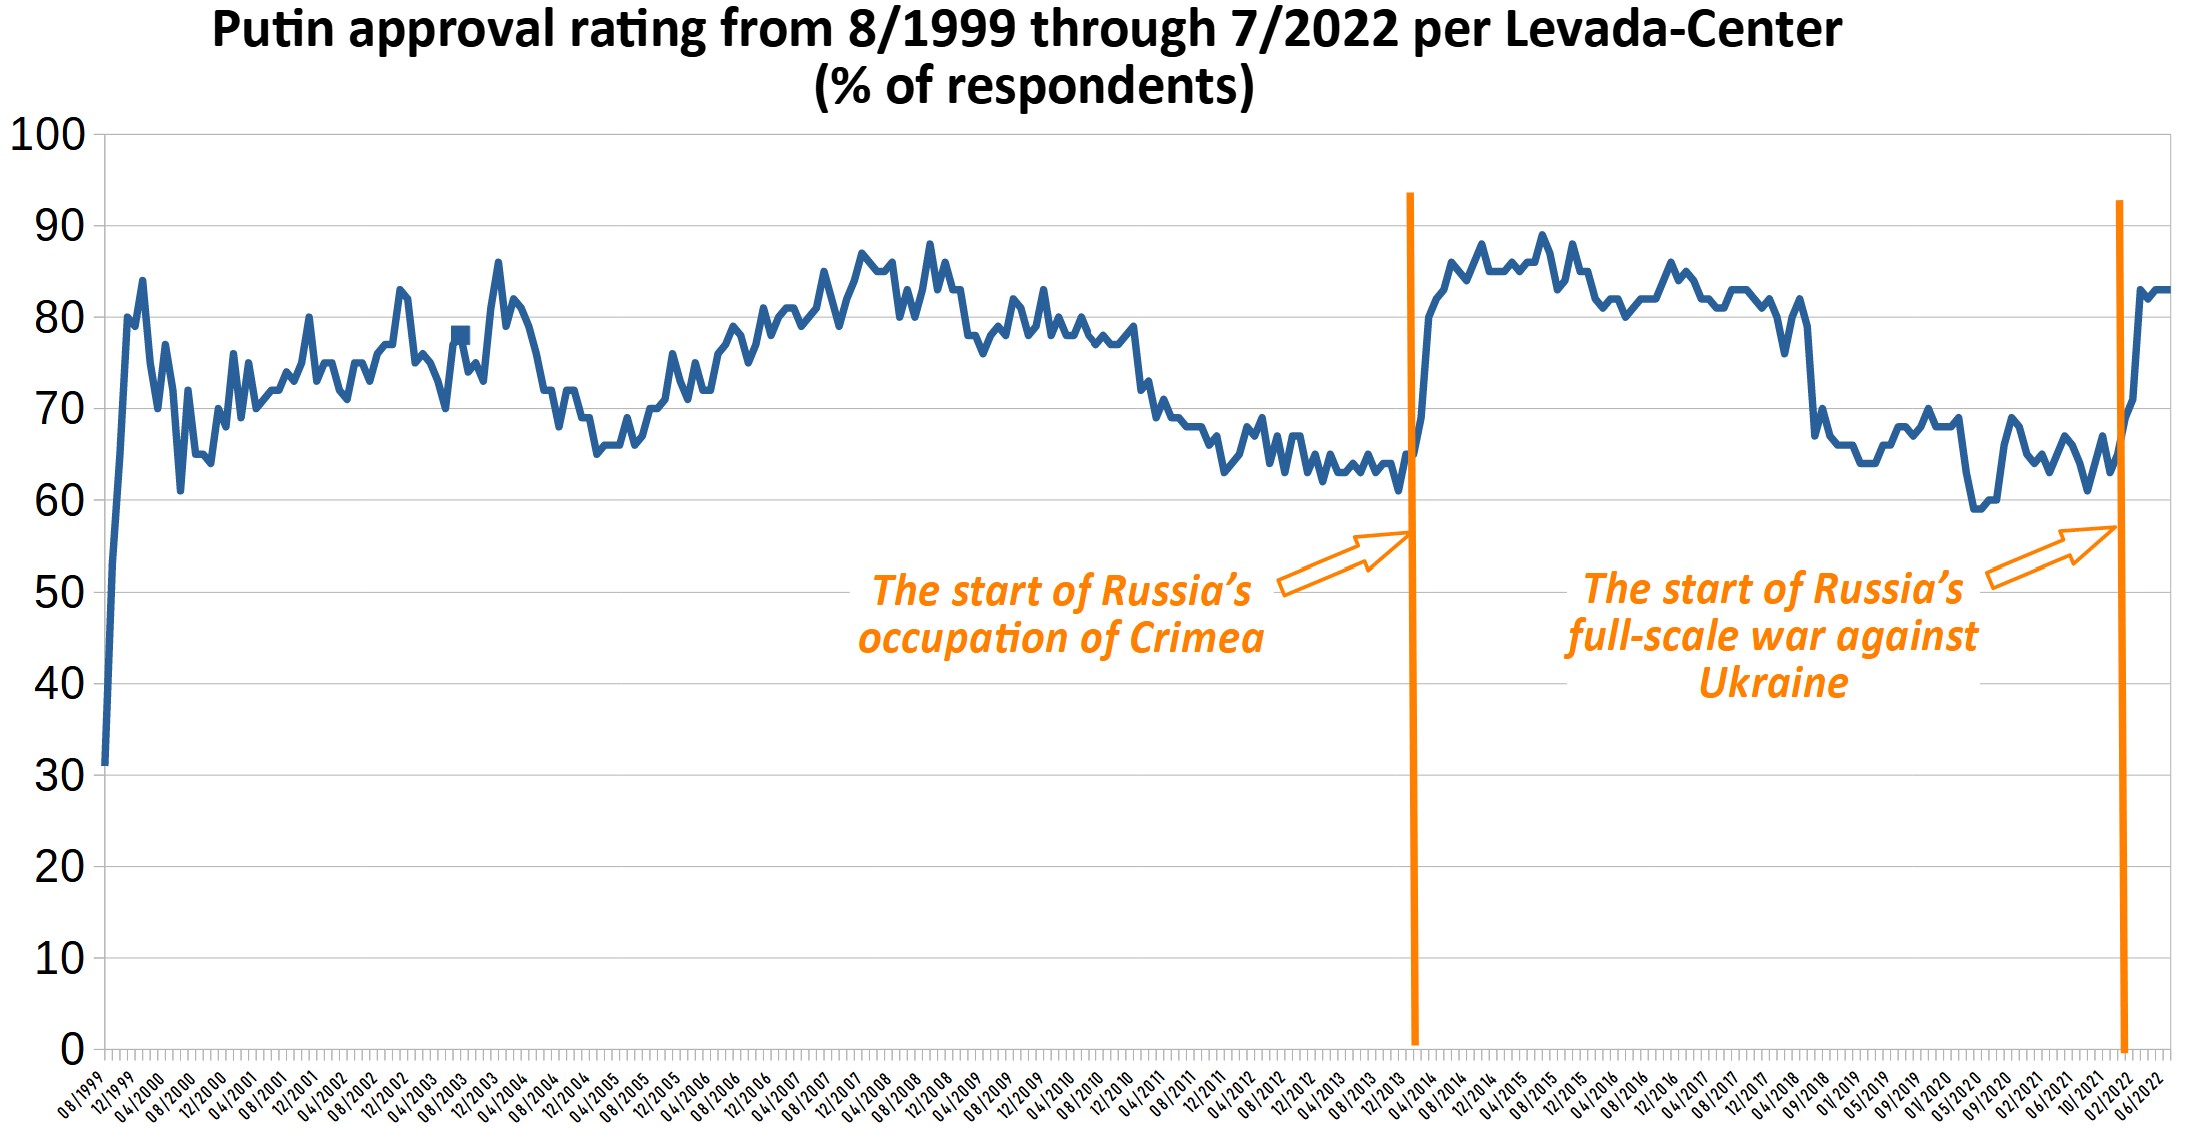 Putin approval rating by Russians from 8-1999 through 7-2022 per Levada Center